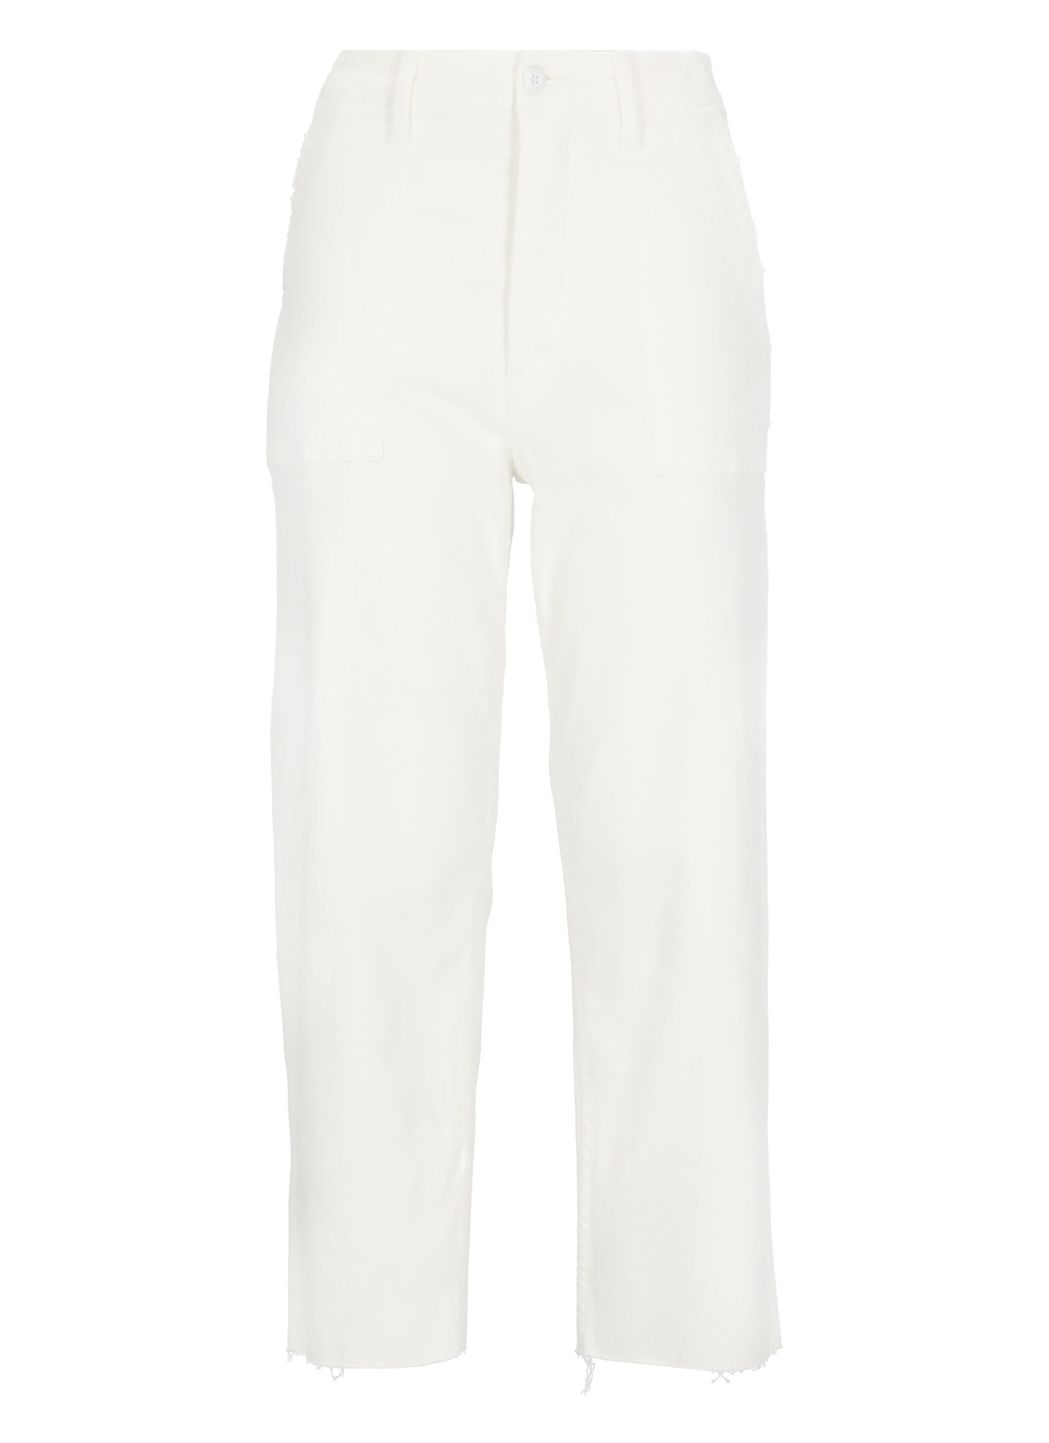 Patch Pocket trousers